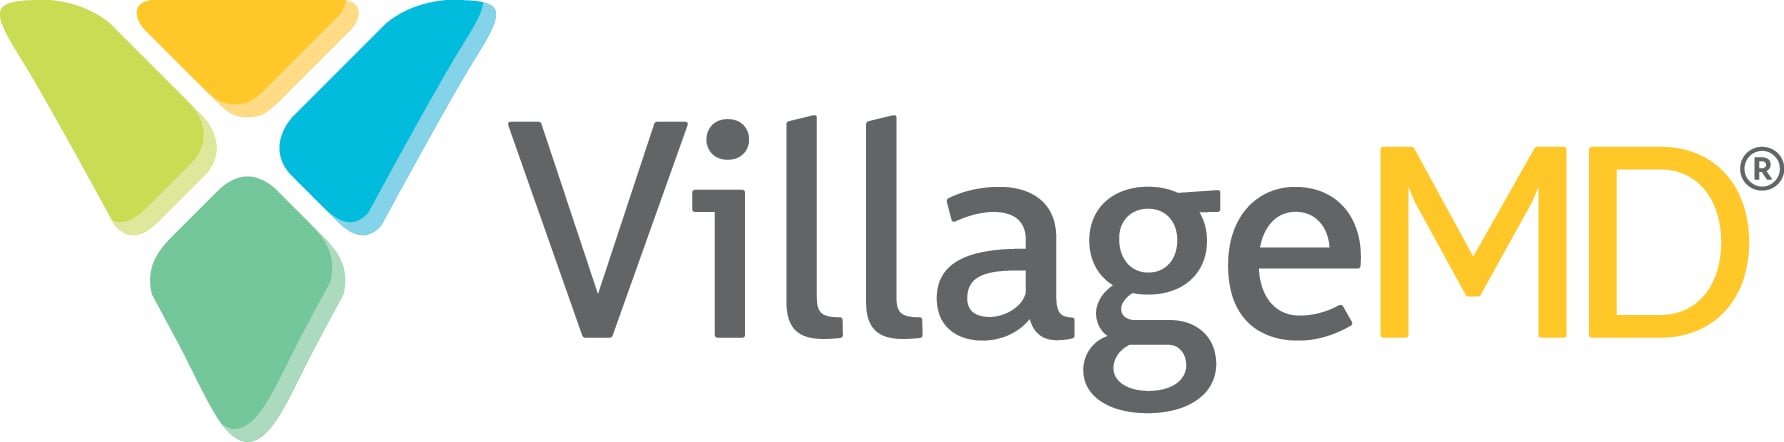 Walgreens and VillageMD Expand in Texas with More Than 20 New Full-Service, Primary Care Practices Opening in Dallas Over the Next Year